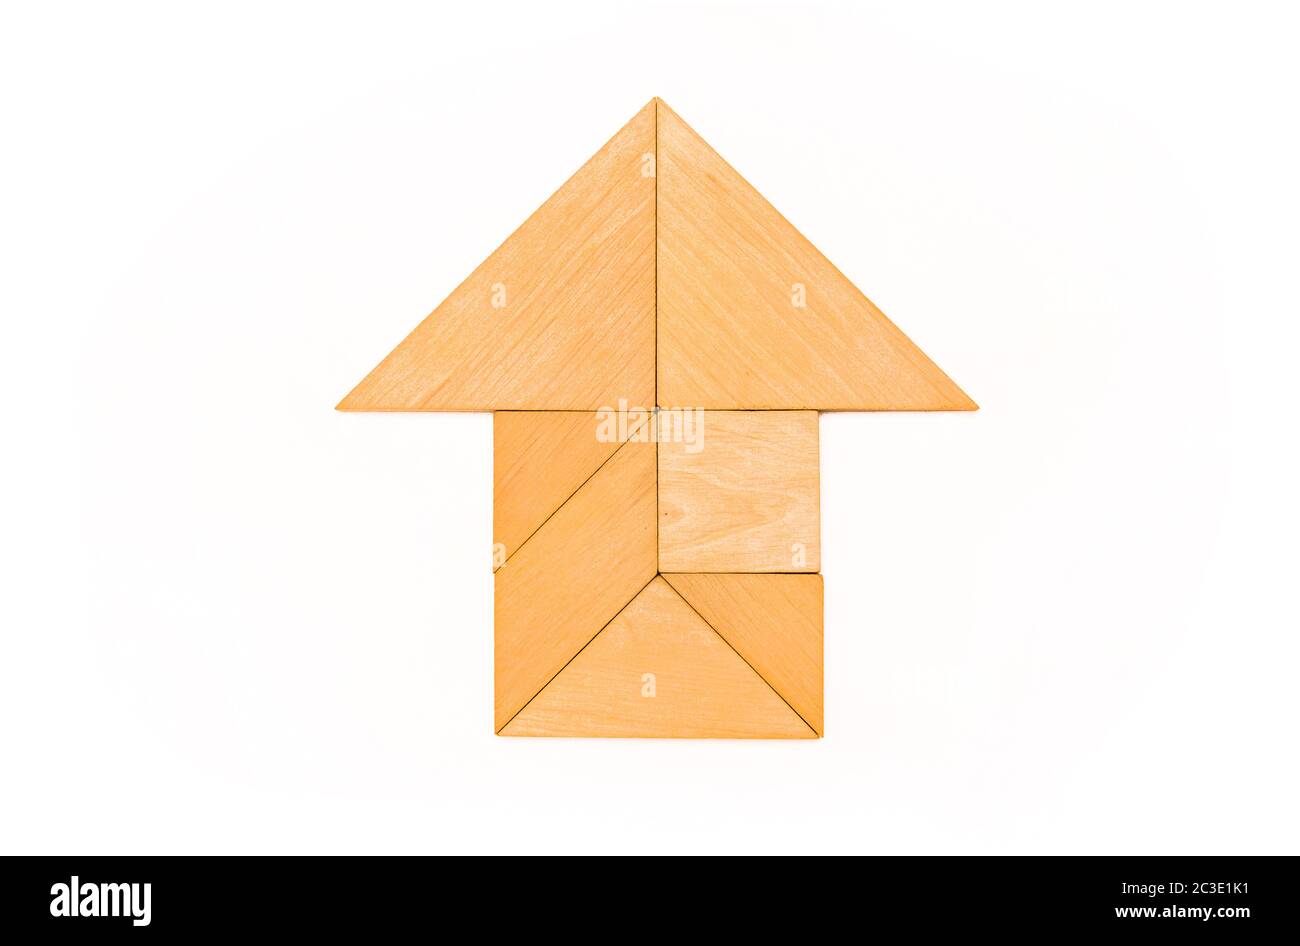 Flat lay - pictogram, symbol and icon of house and arrow made of wooden tangram pieces. White background. Stock Photo